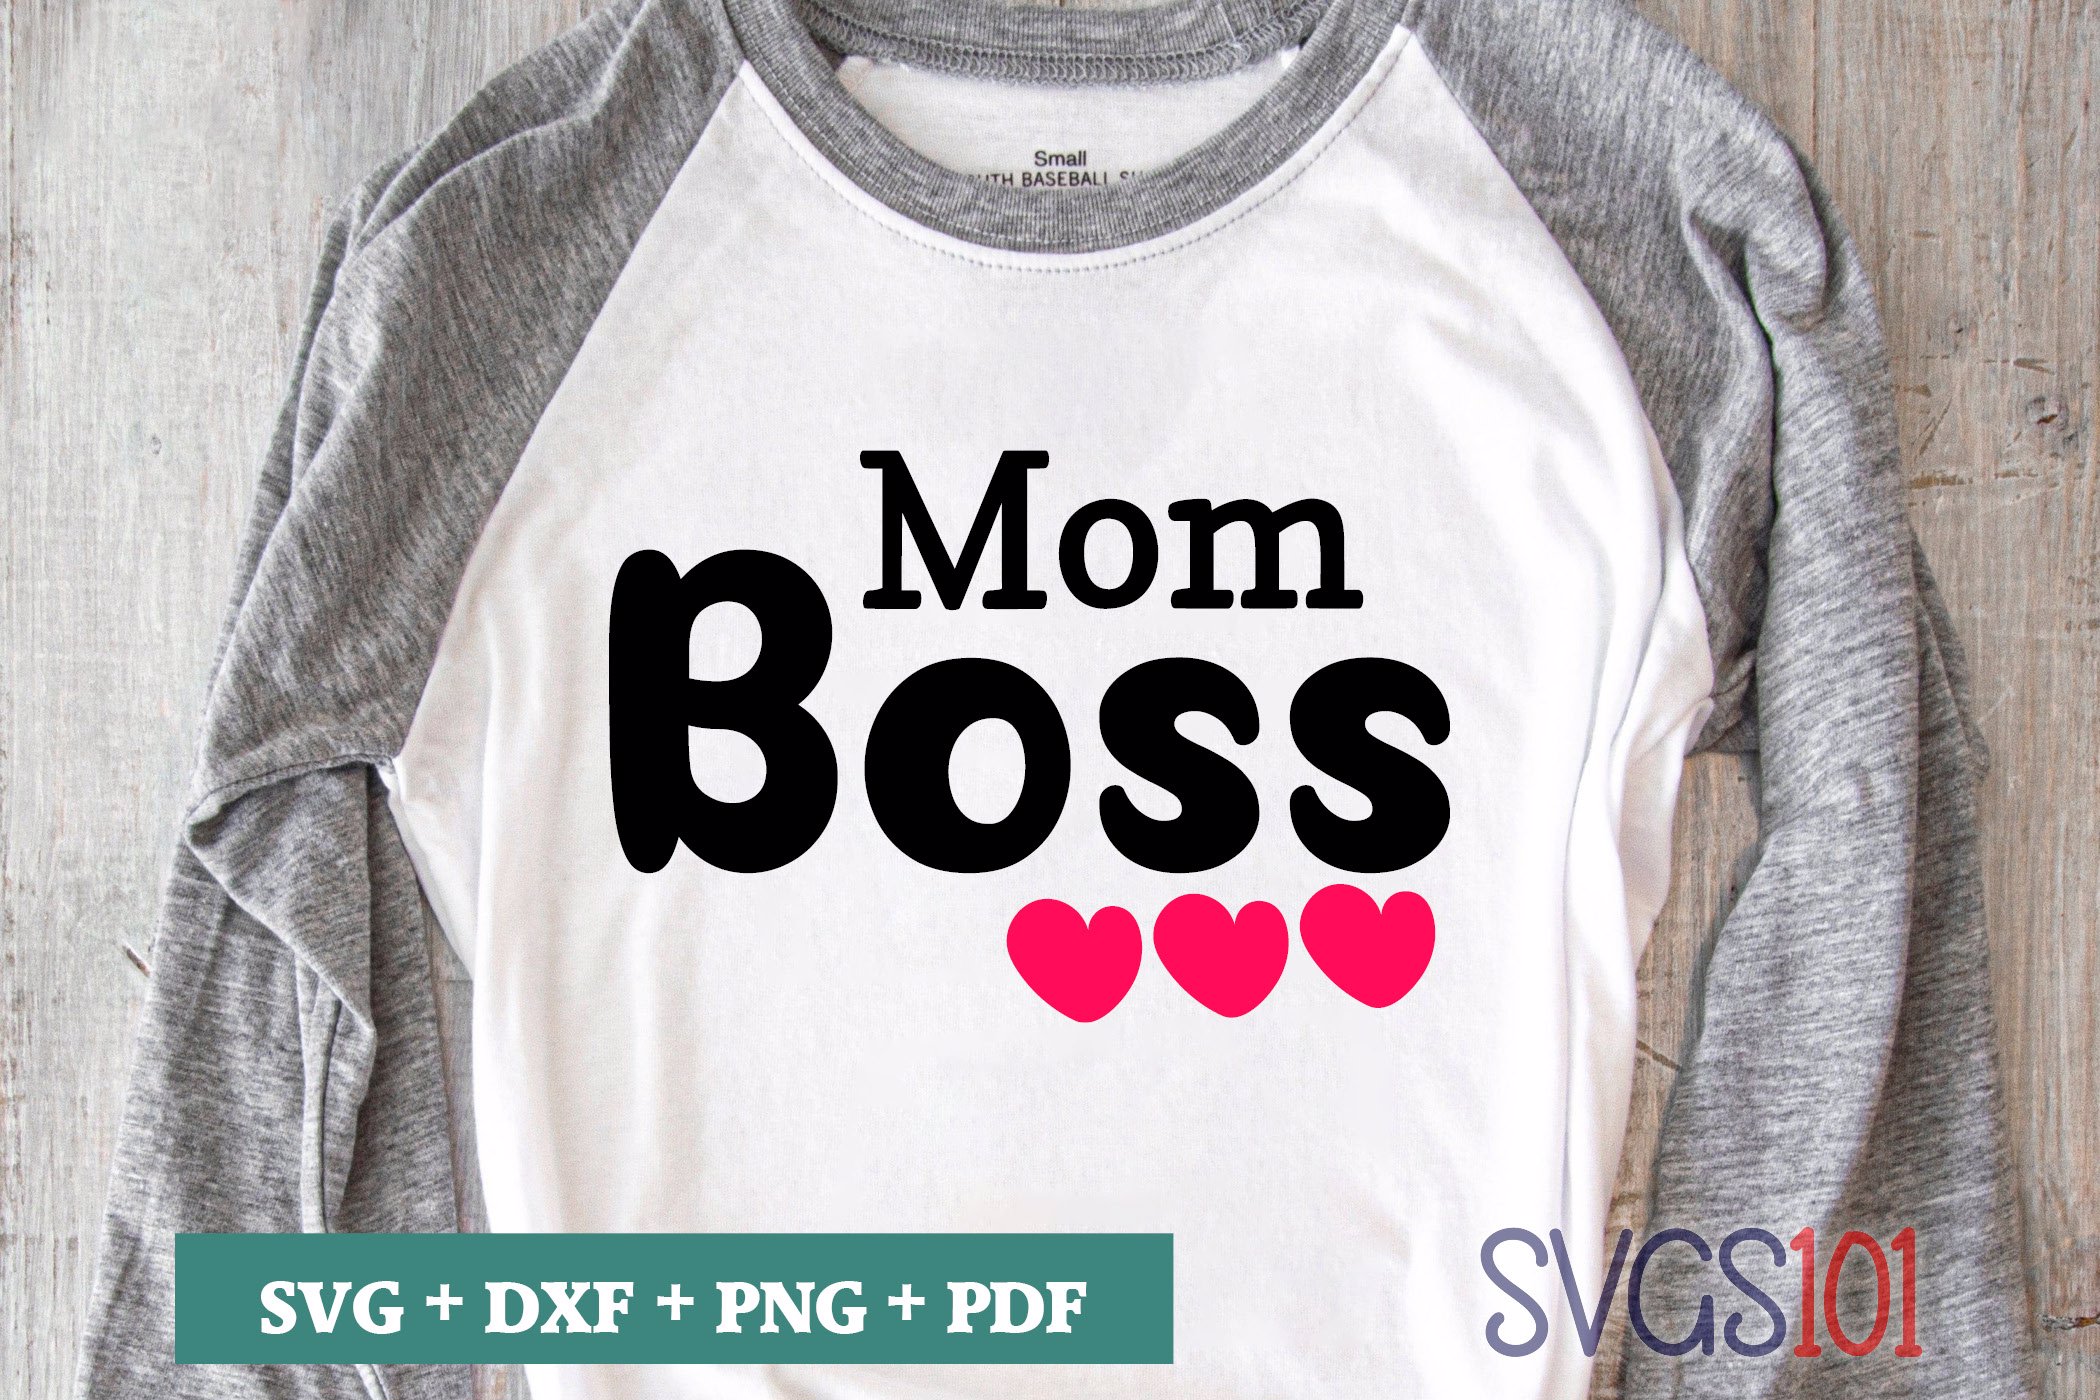 Download Mom Boss SVG Cuttable file - DXF, EPS, PNG, PDF | SVG ...